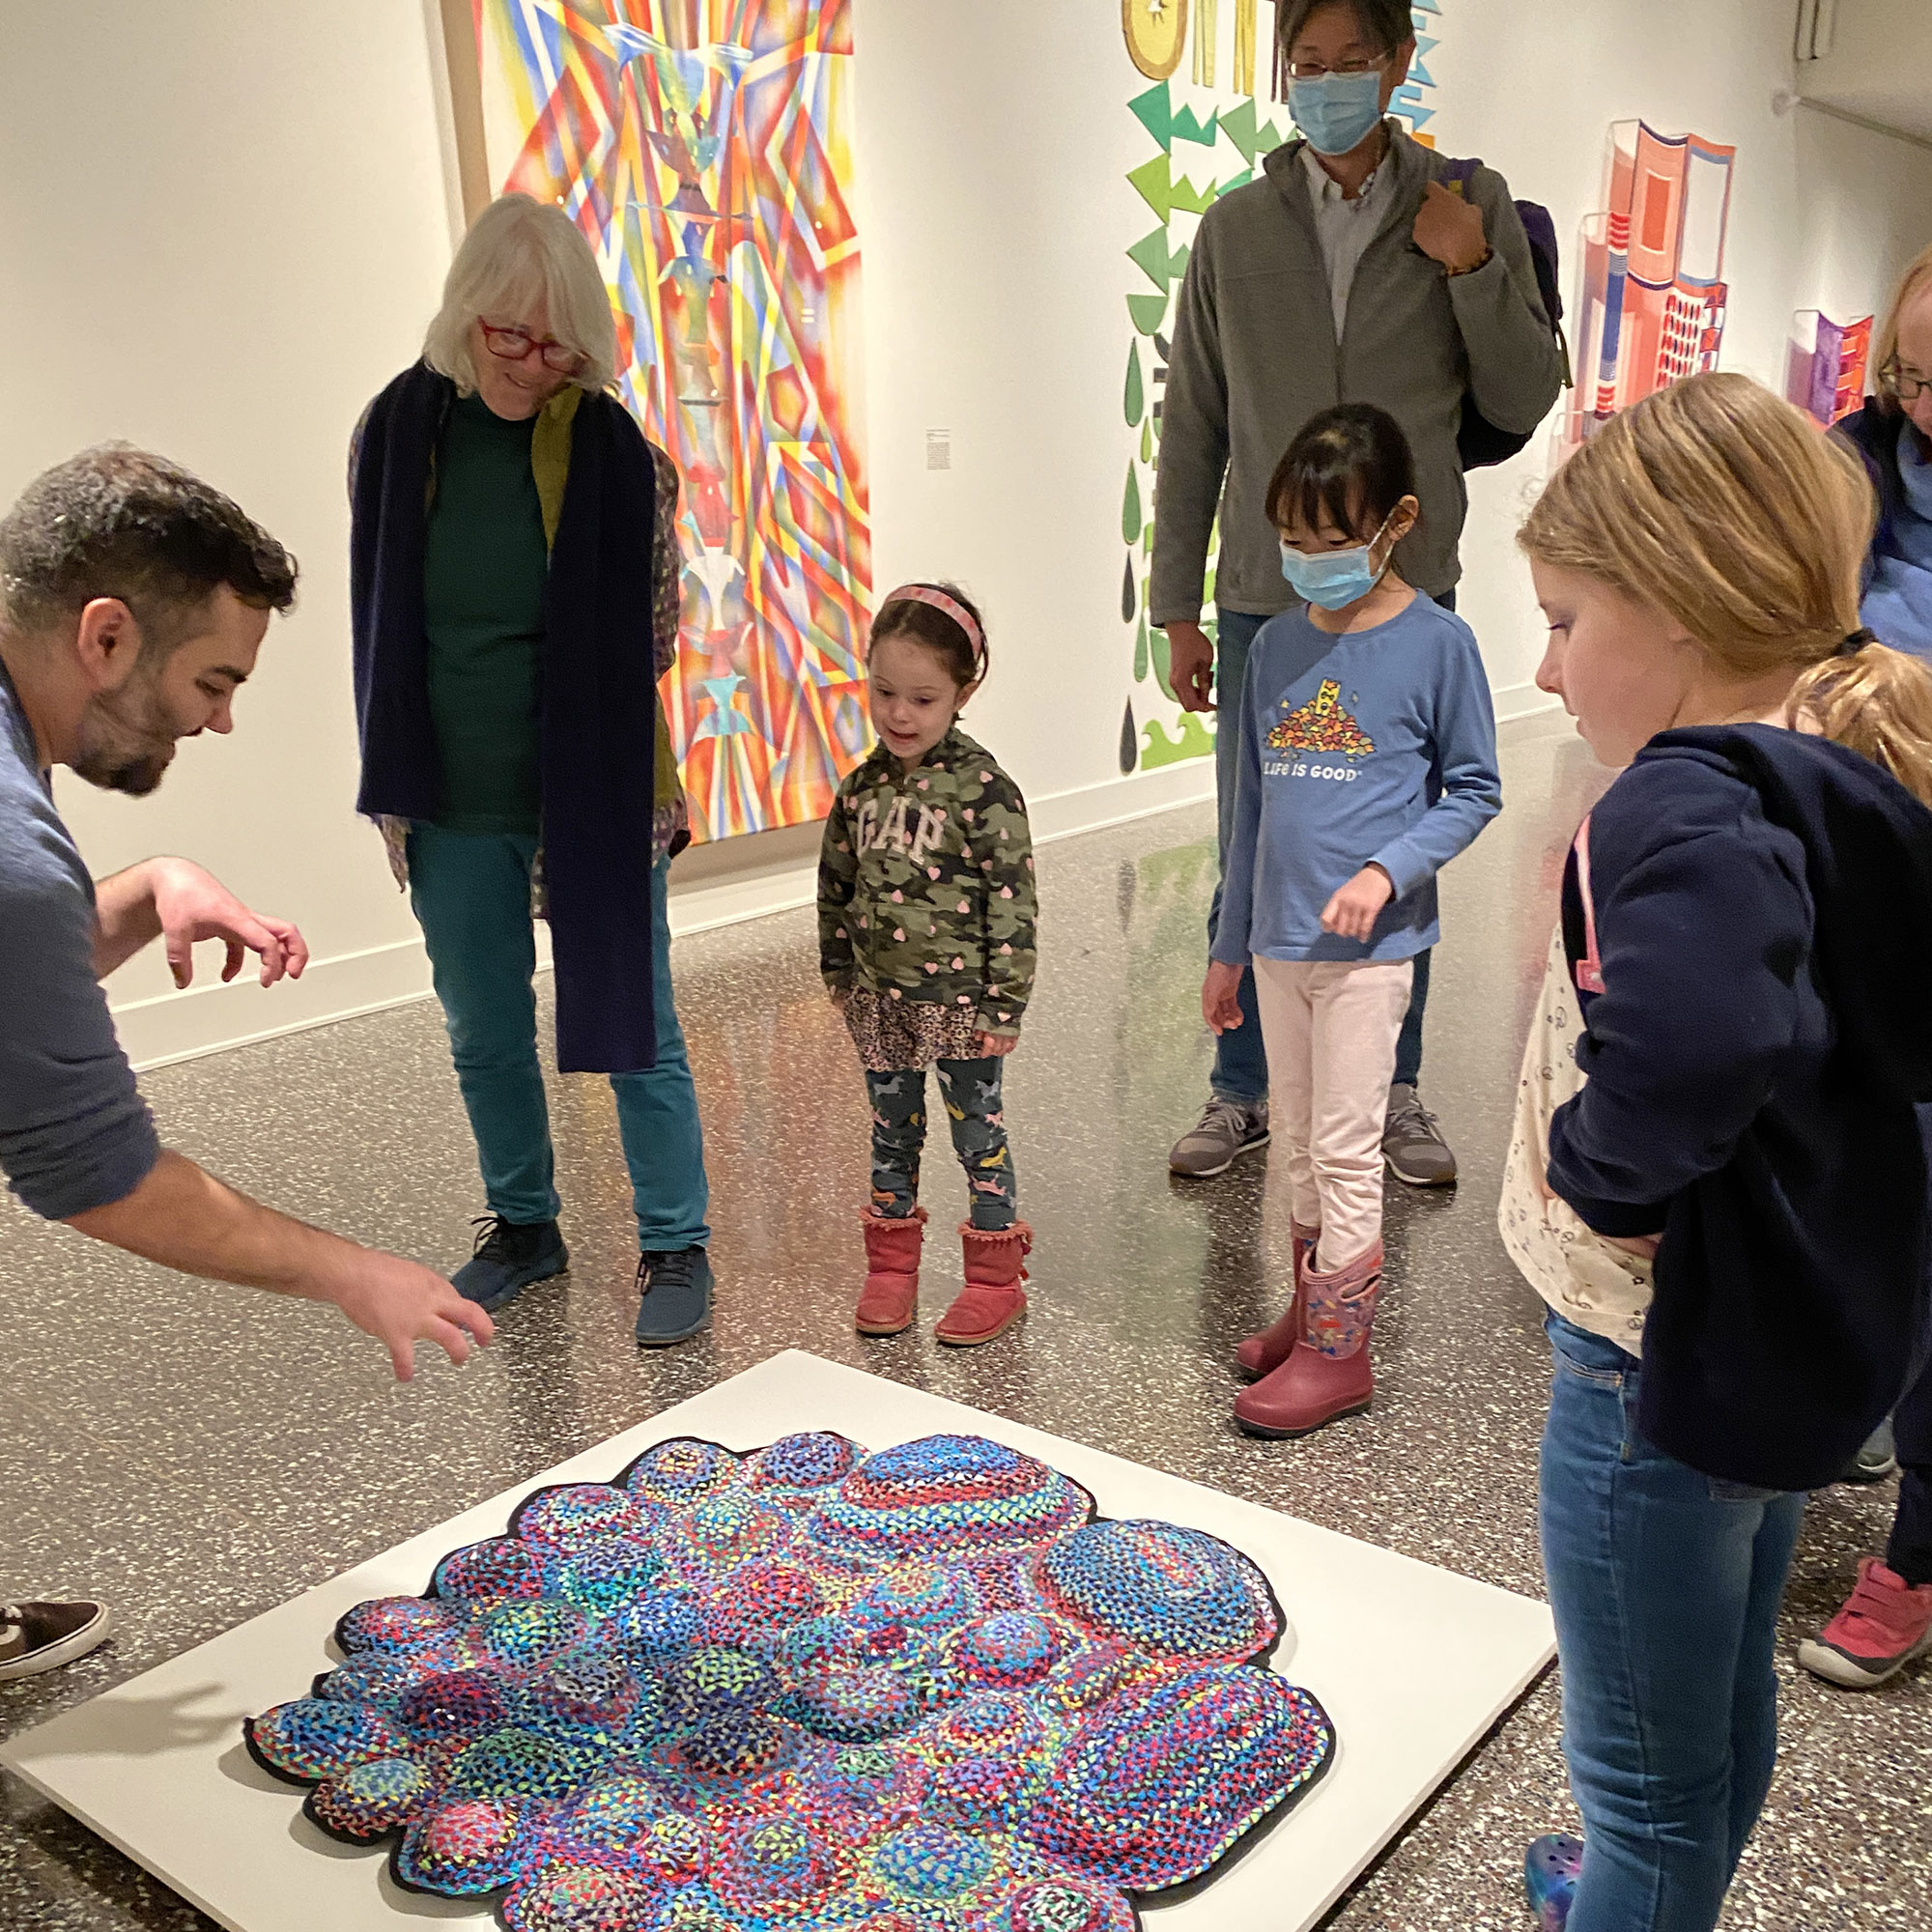 artist explaining a mosaic artwork to children and their families